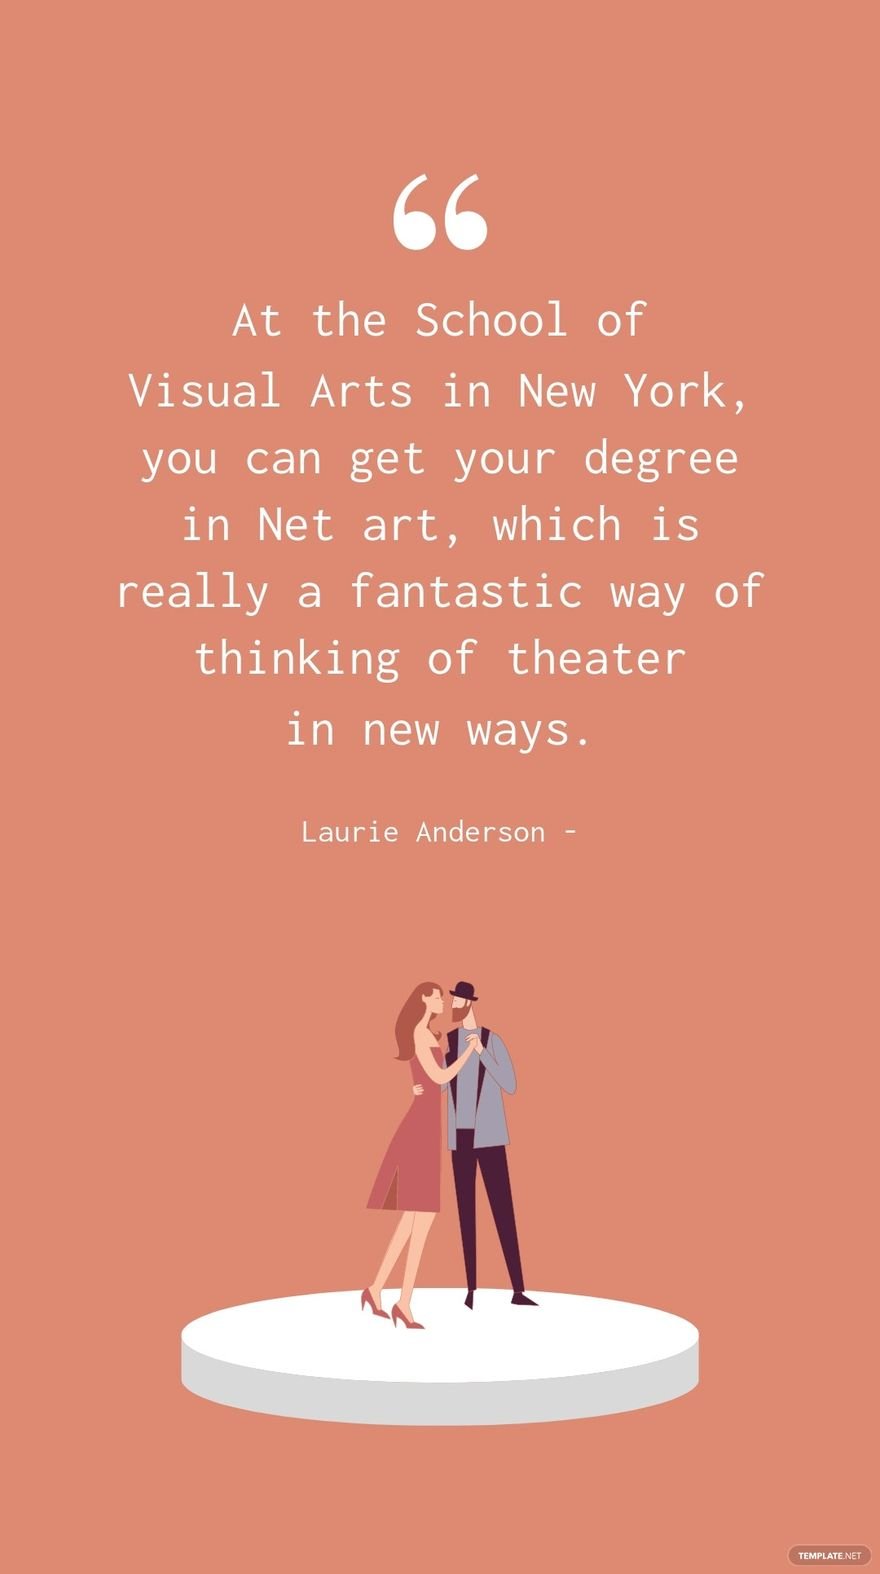 Free Laurie Anderson - At the School of Visual Arts in New York, you can get your degree in Net art, which is really a fantastic way of thinking of theater in new ways.